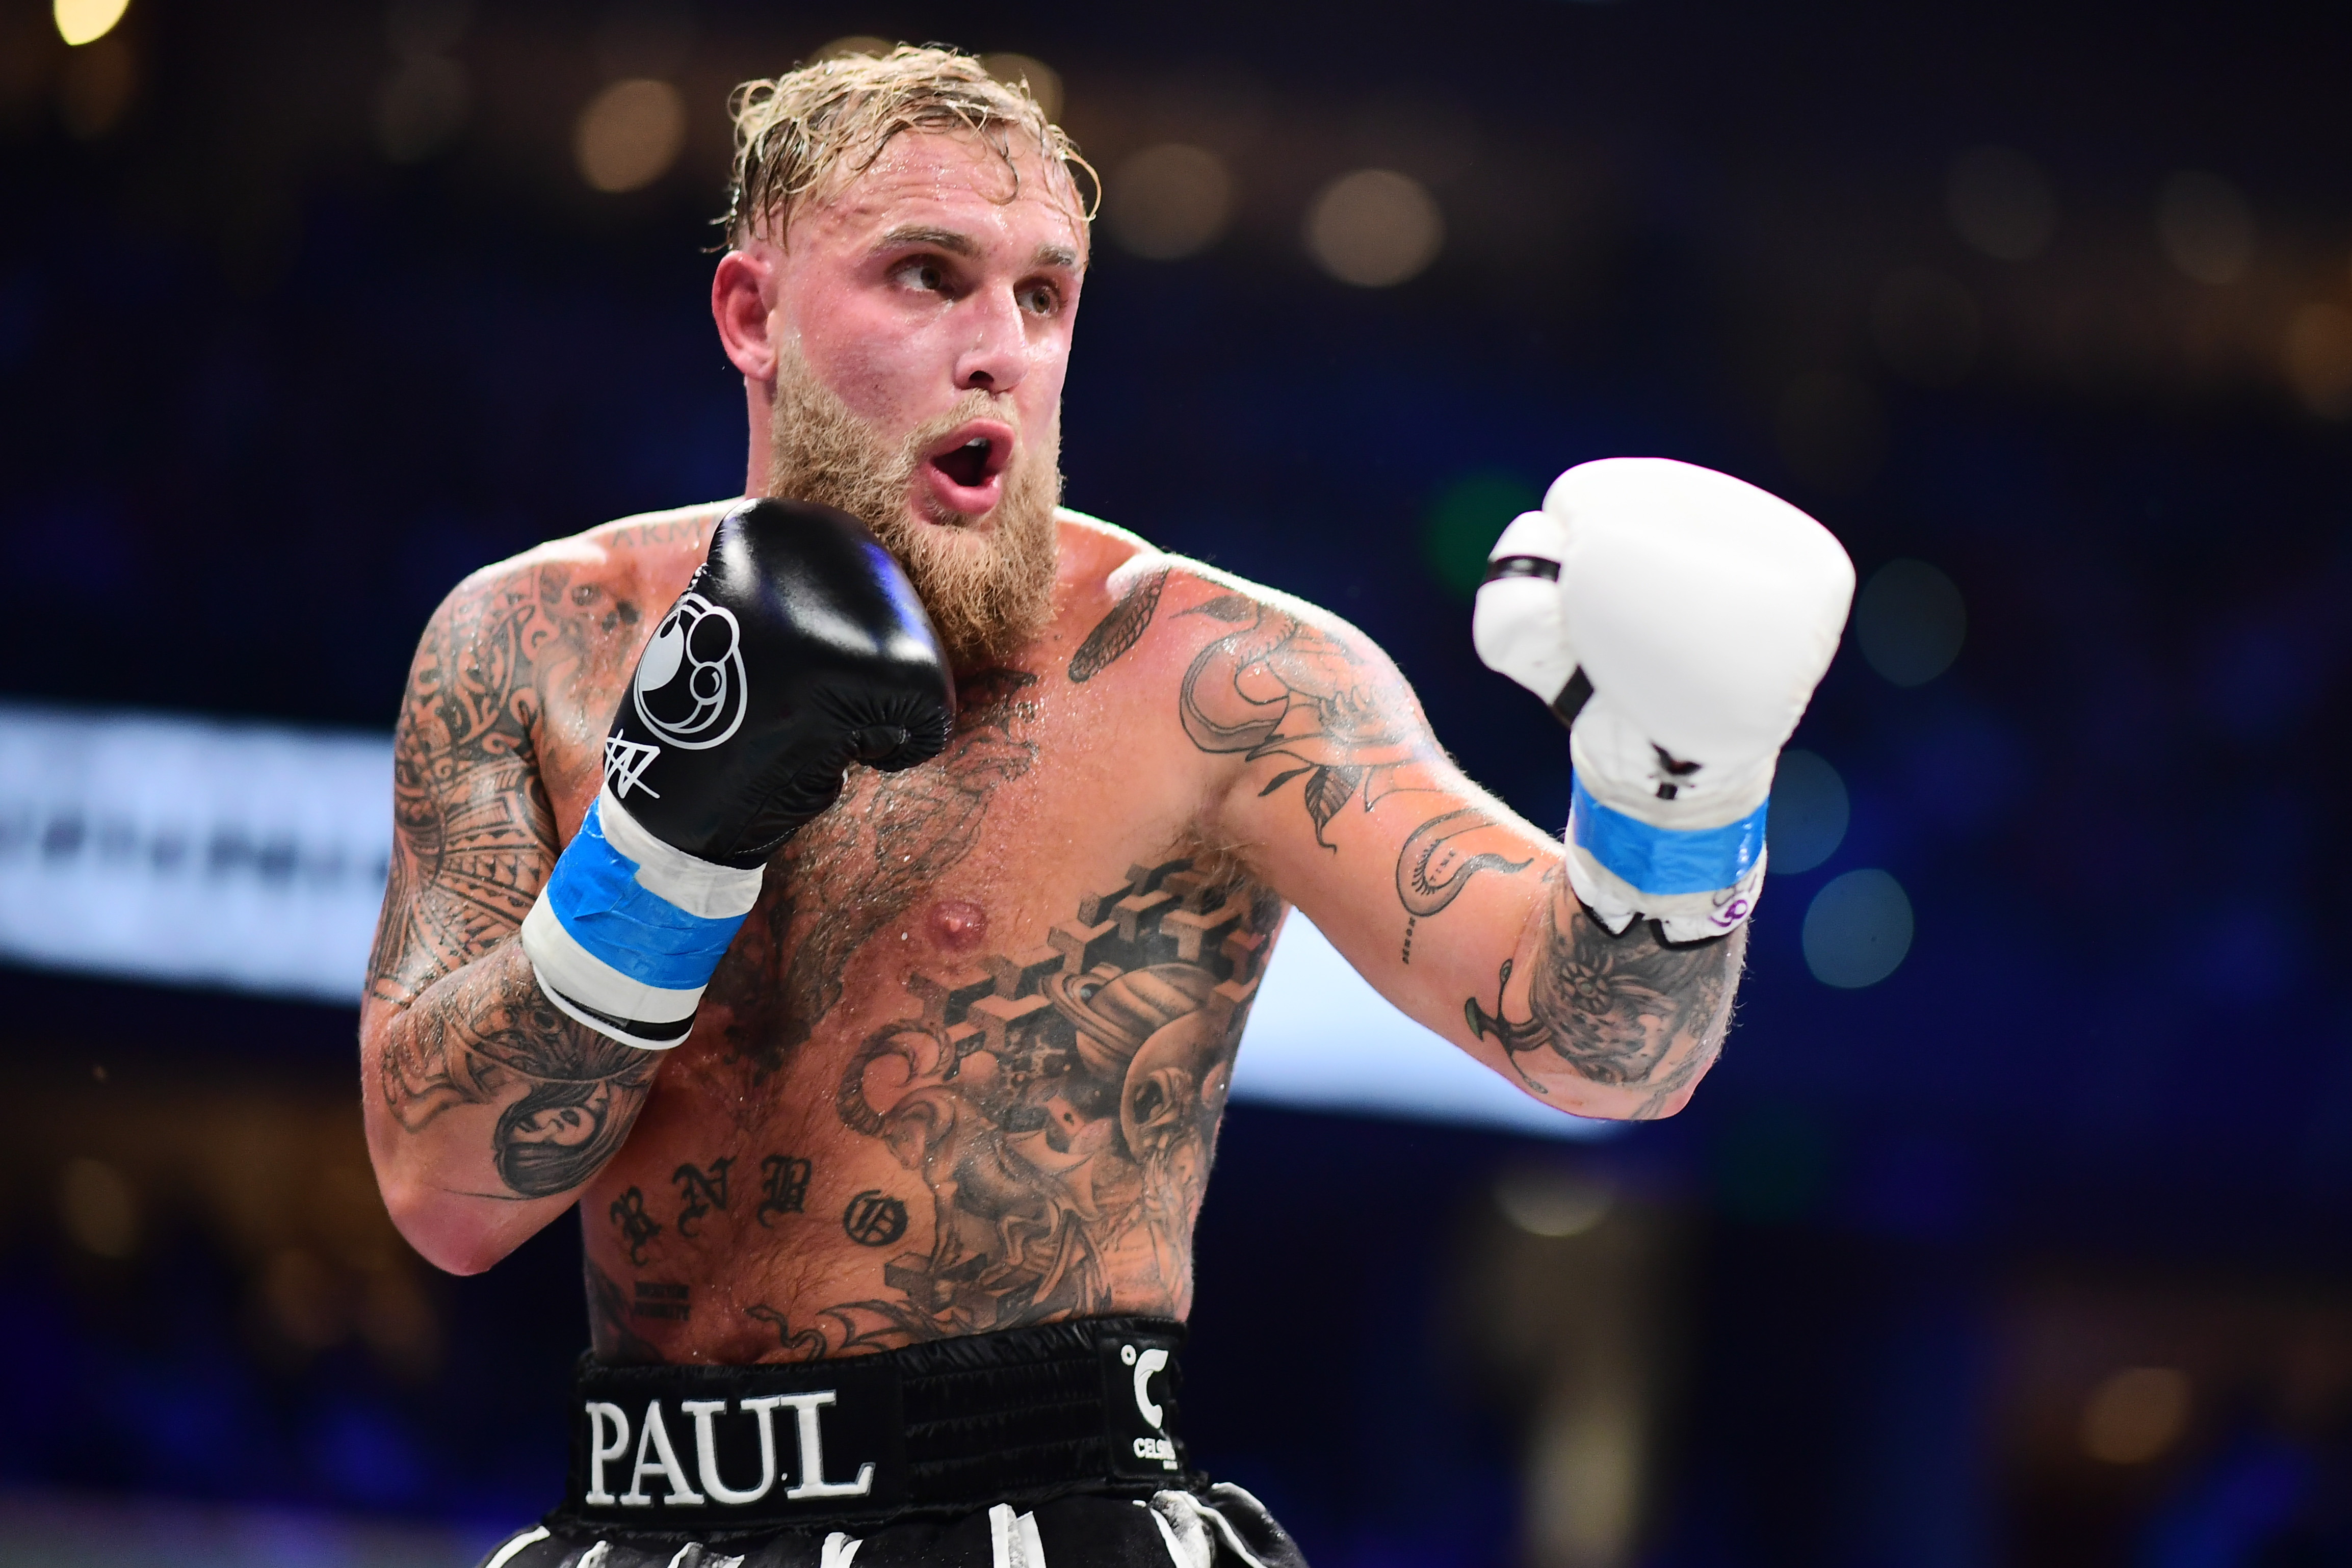 Jake Paul is 10-1 in his pro boxing career